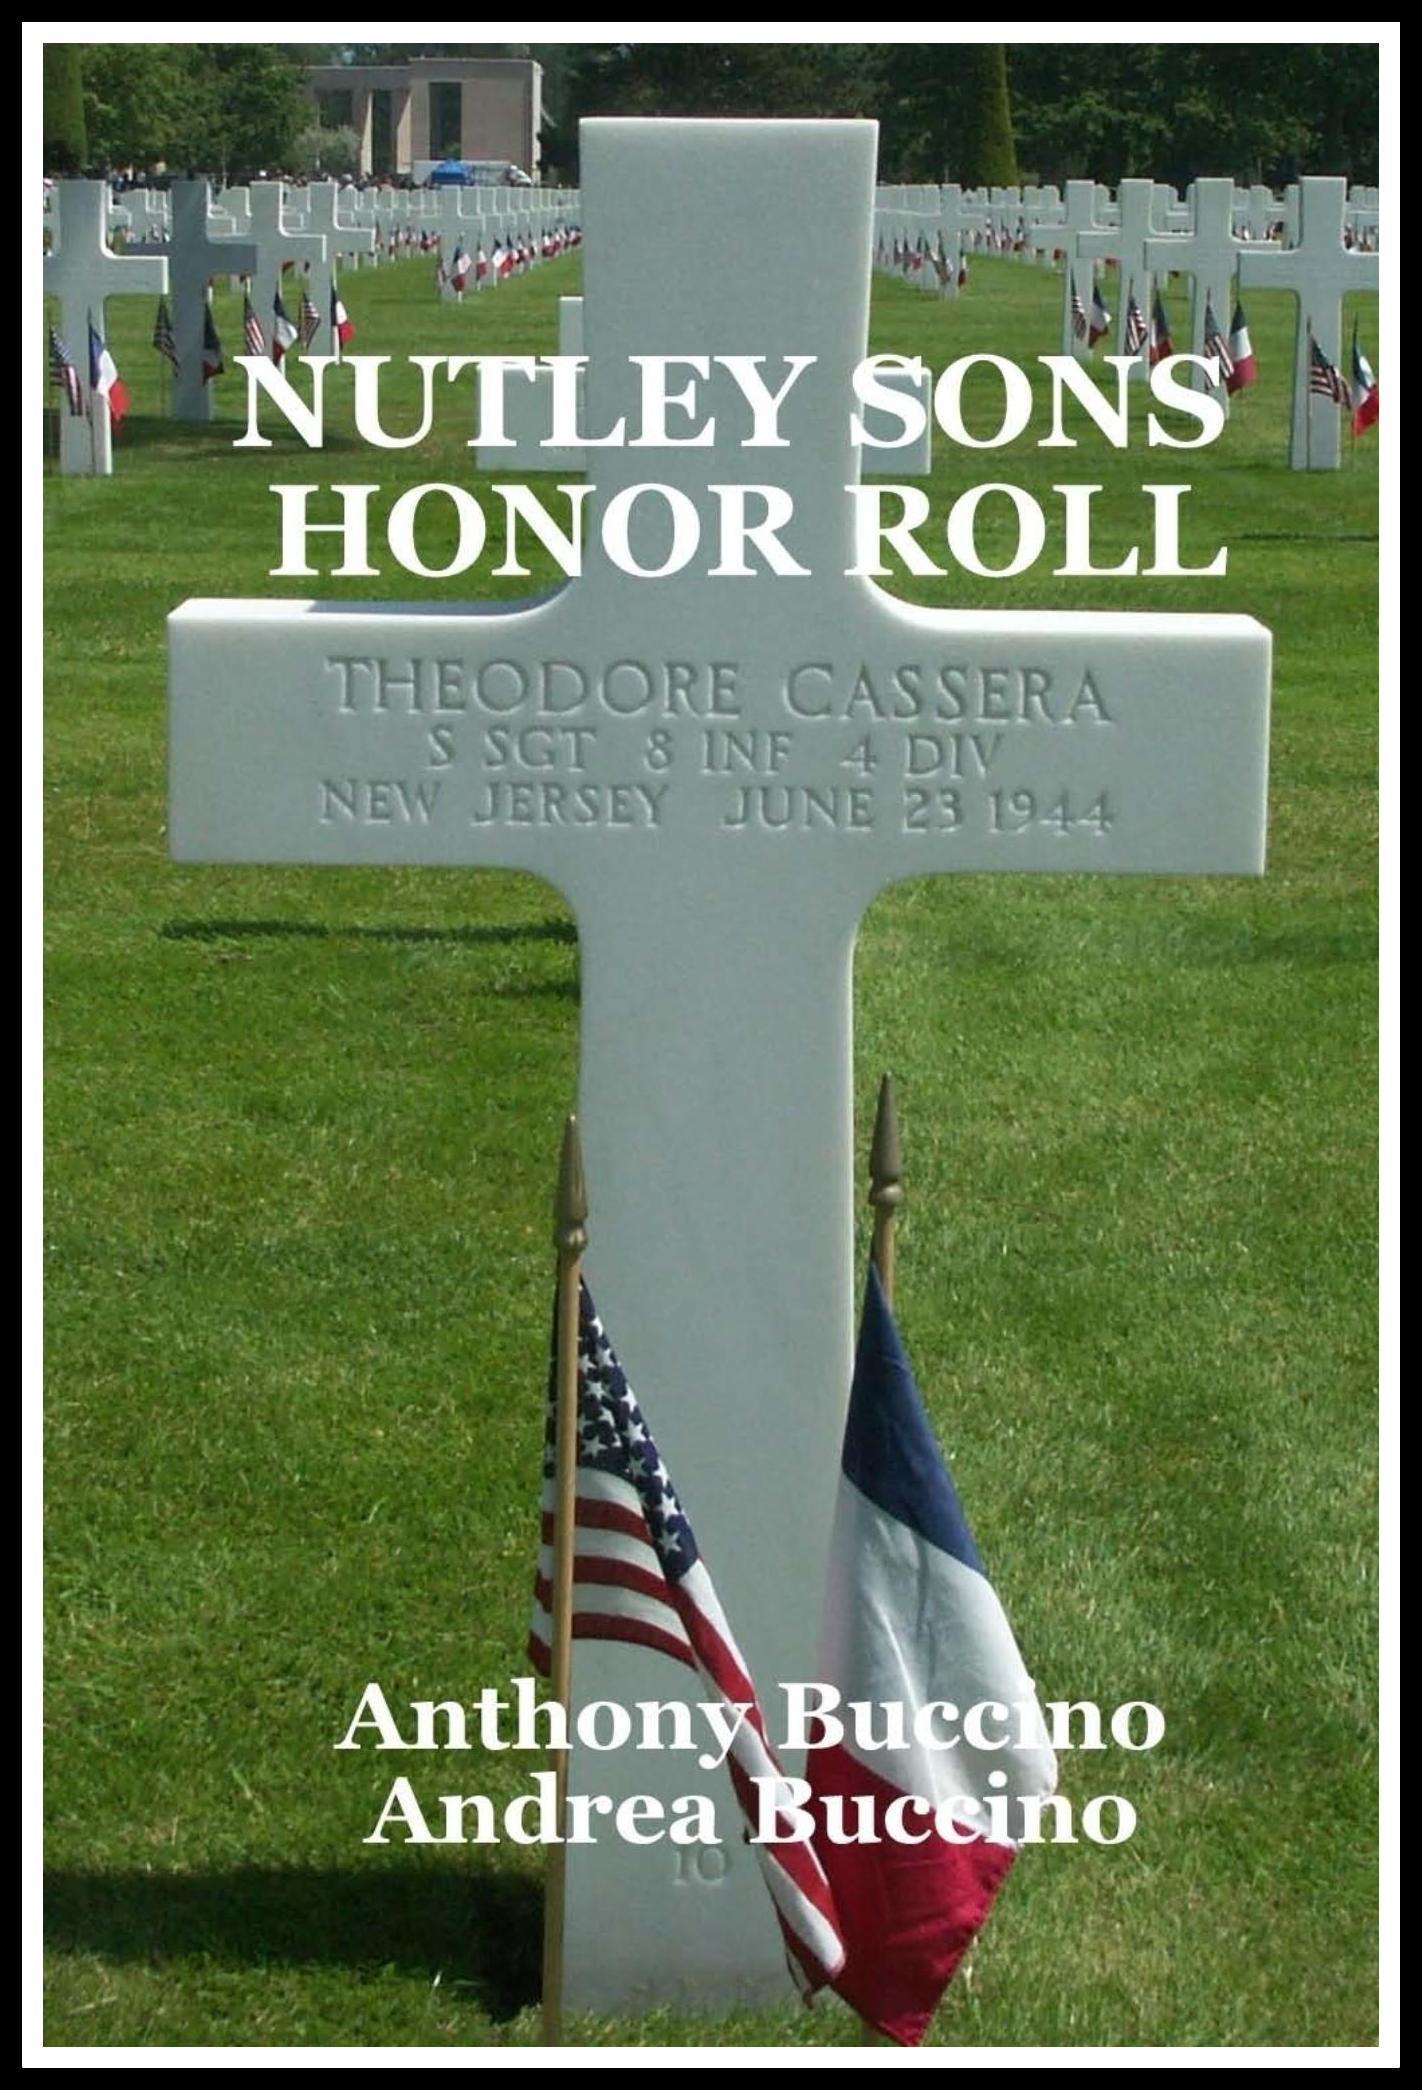 Nutley Sons Honor Roll by Anthony Buccino and Andrea Buccino